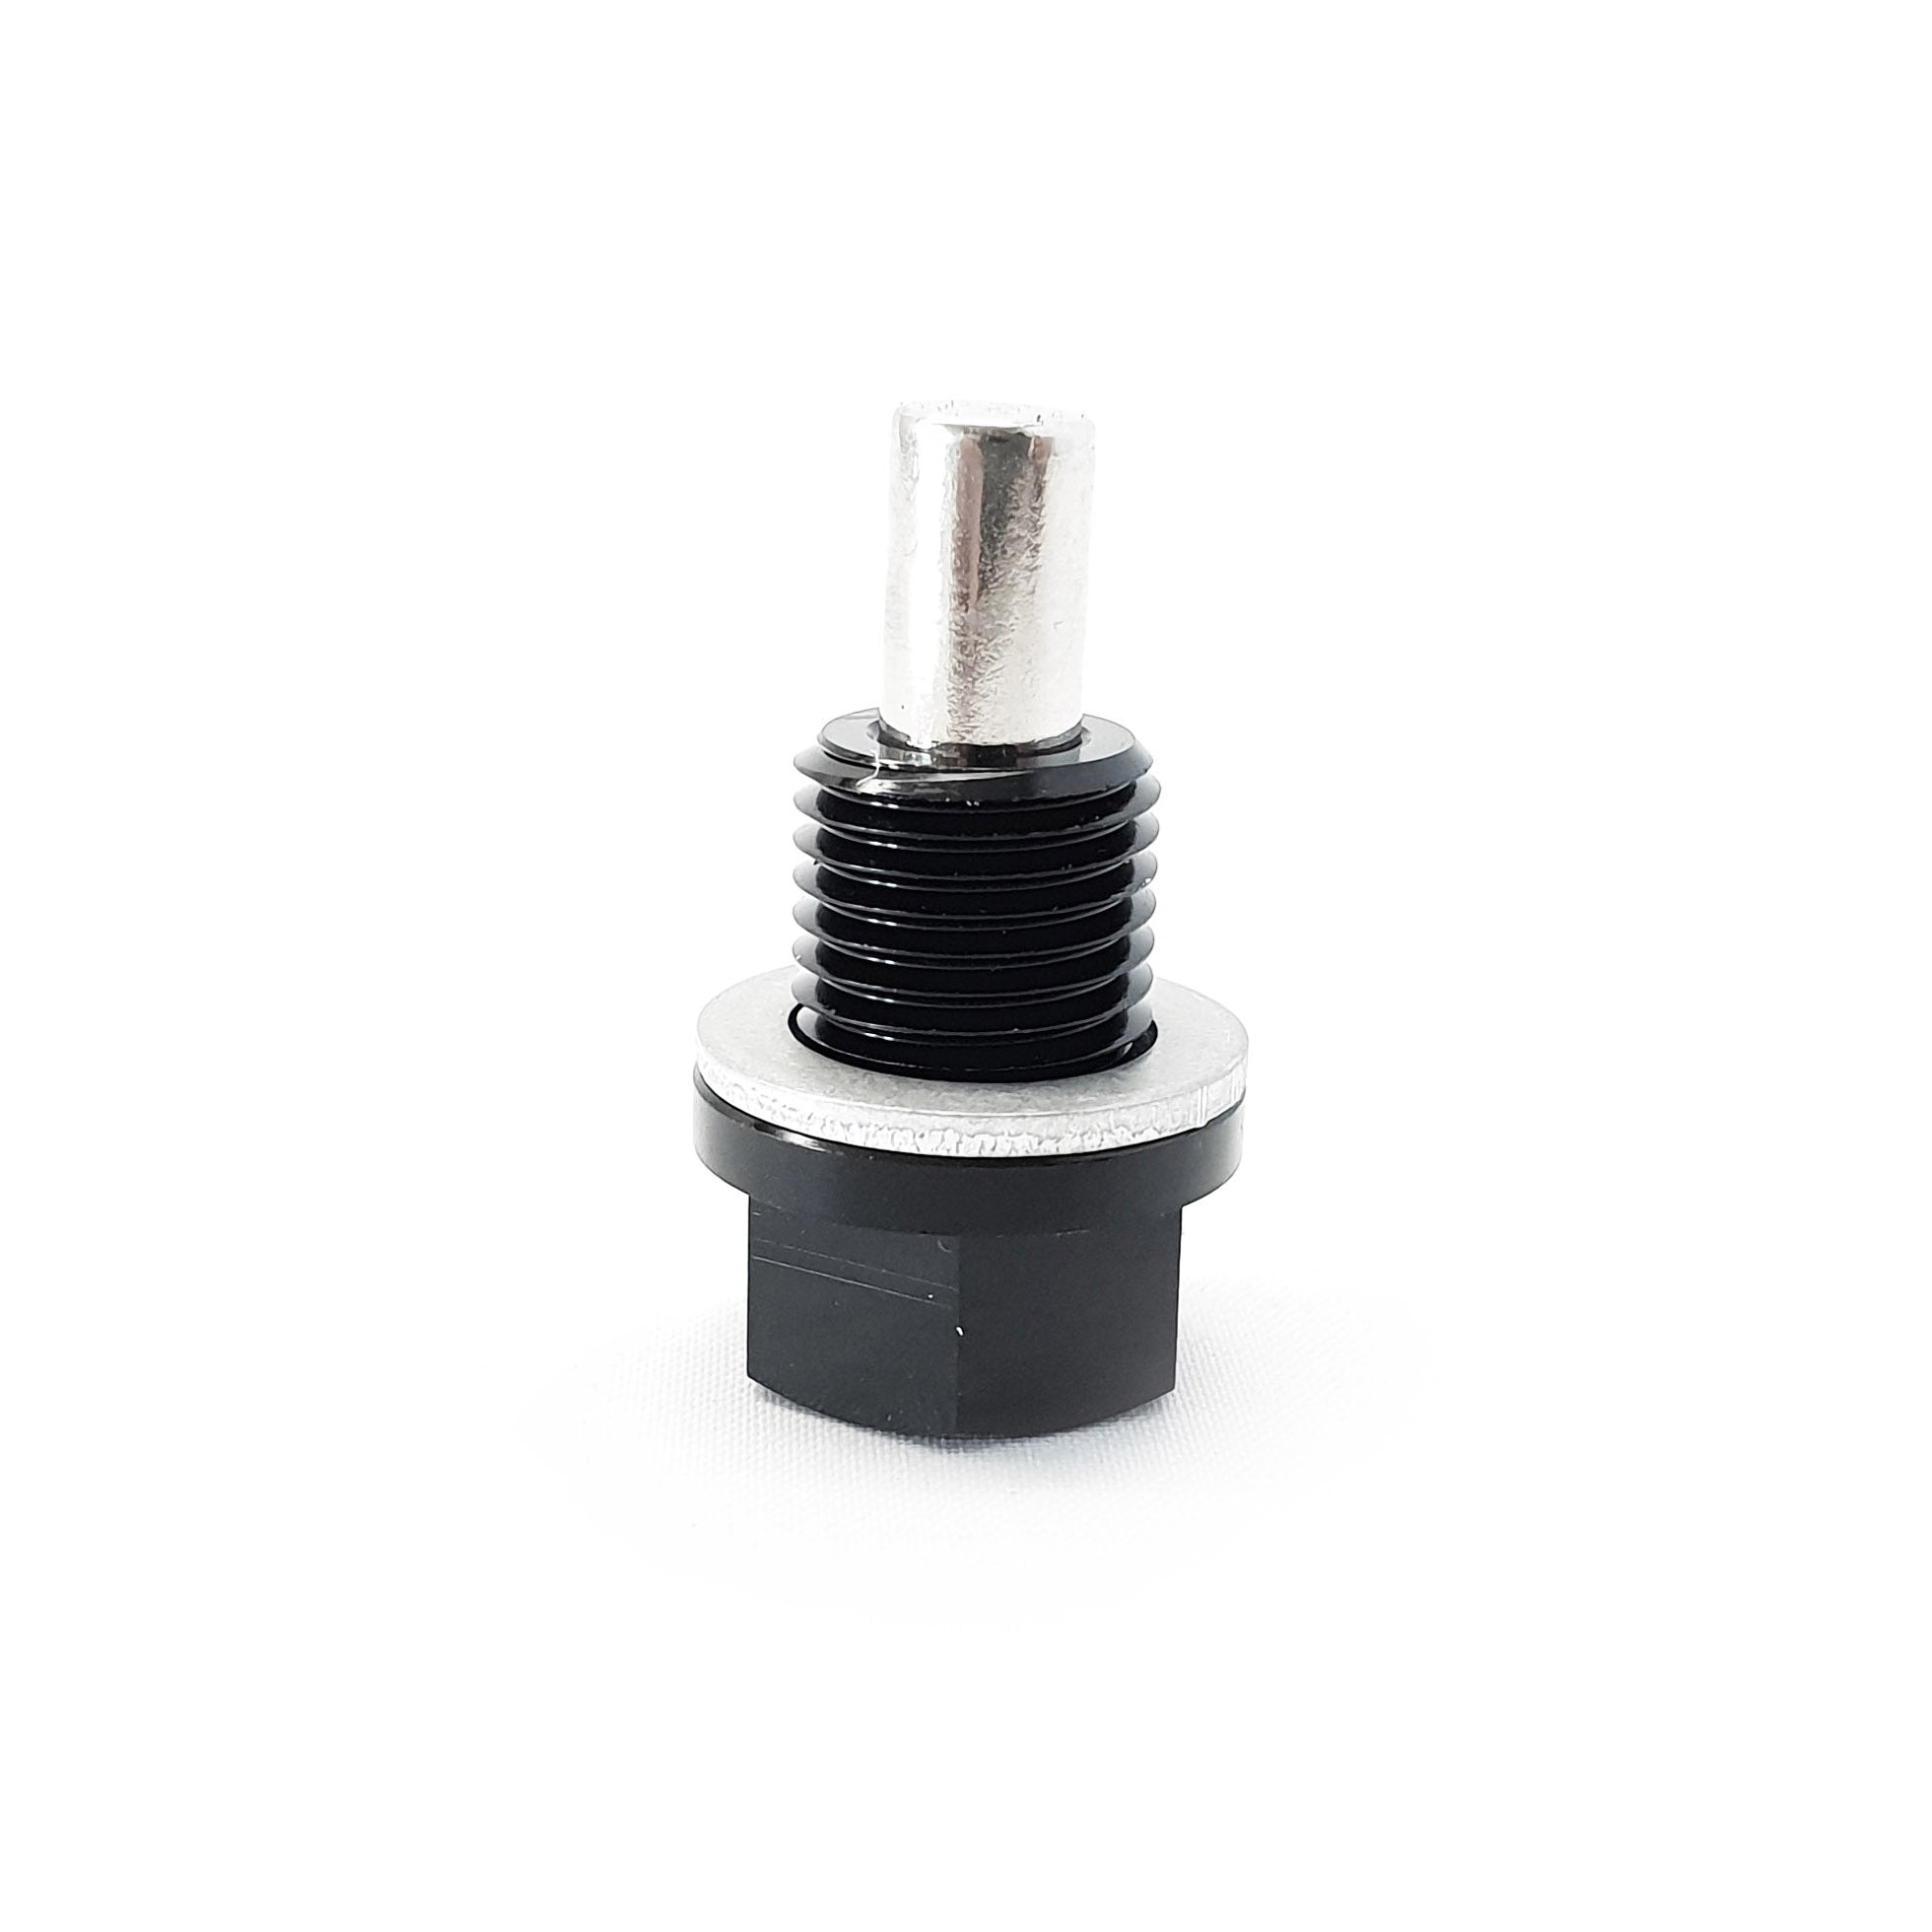 Magnetic Oil Drain Plug with Washer